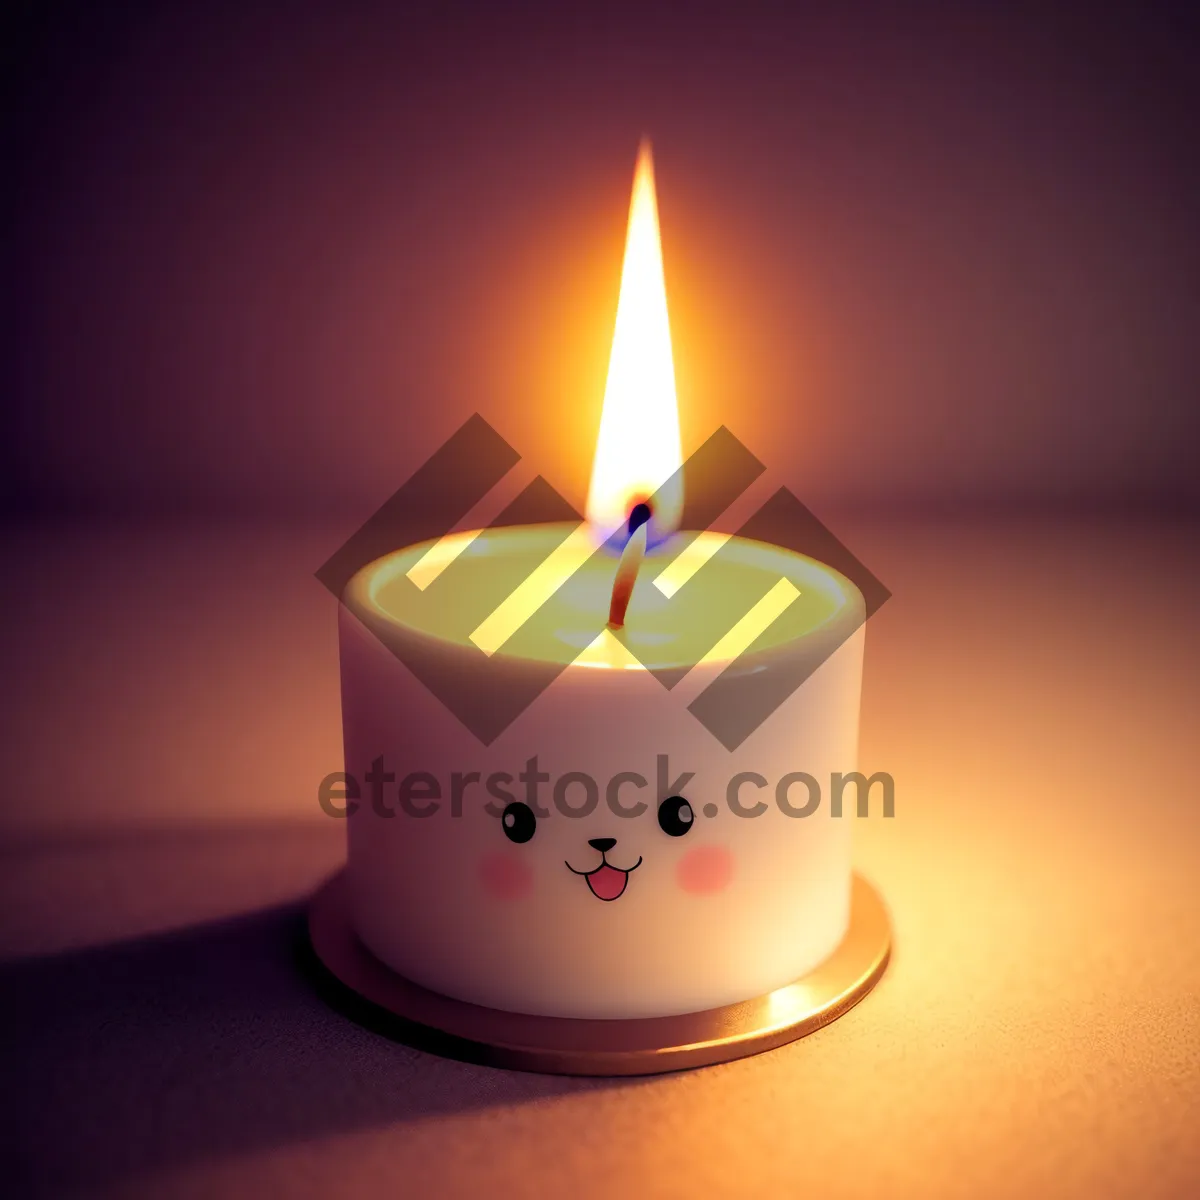 Picture of Glowing Flames: A Captivating Candle's Fiery Radiance